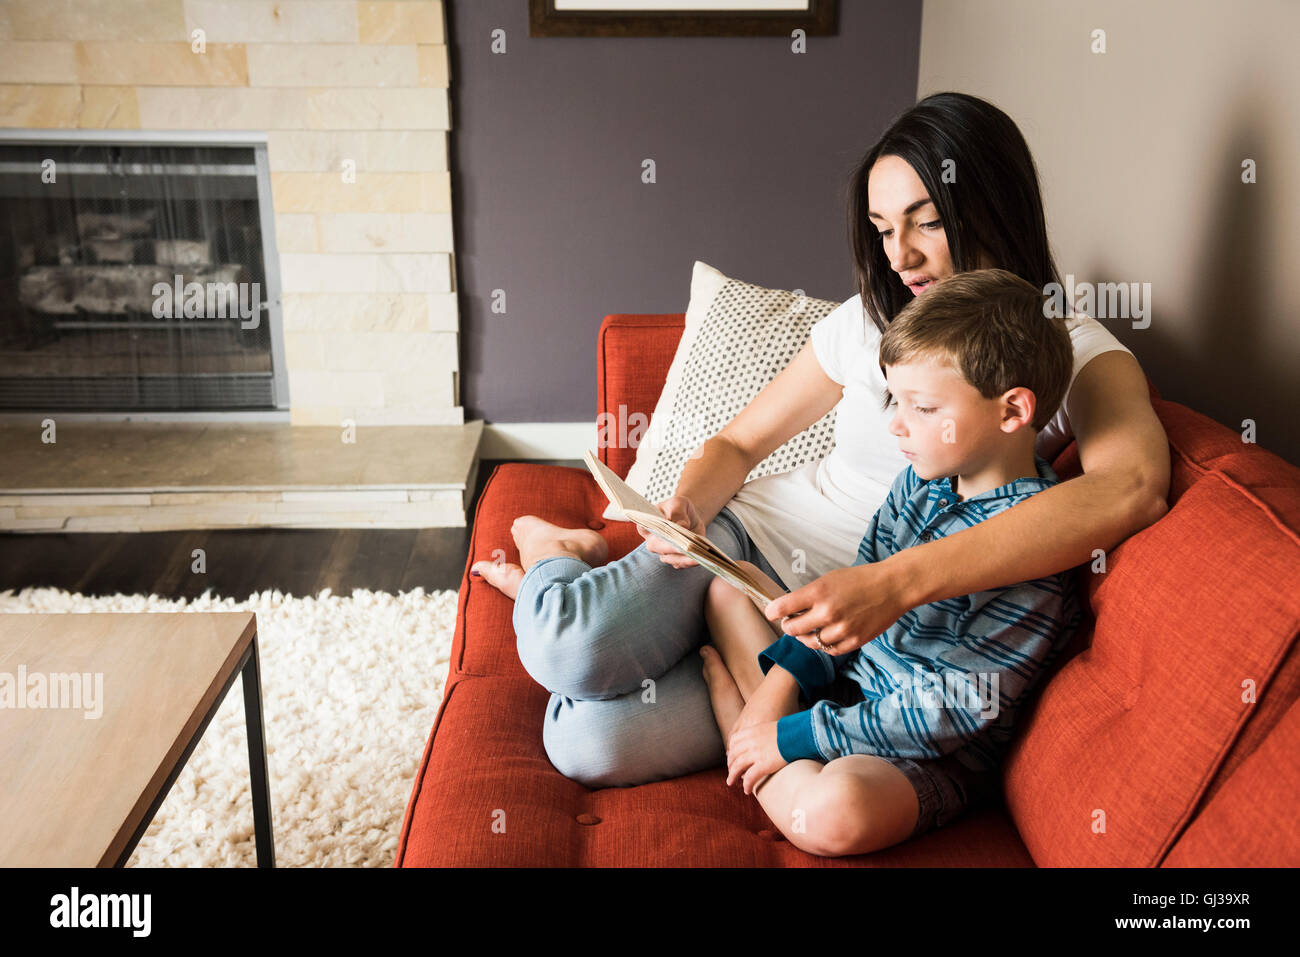 Mother teaching son to read book on sofa Stock Photo